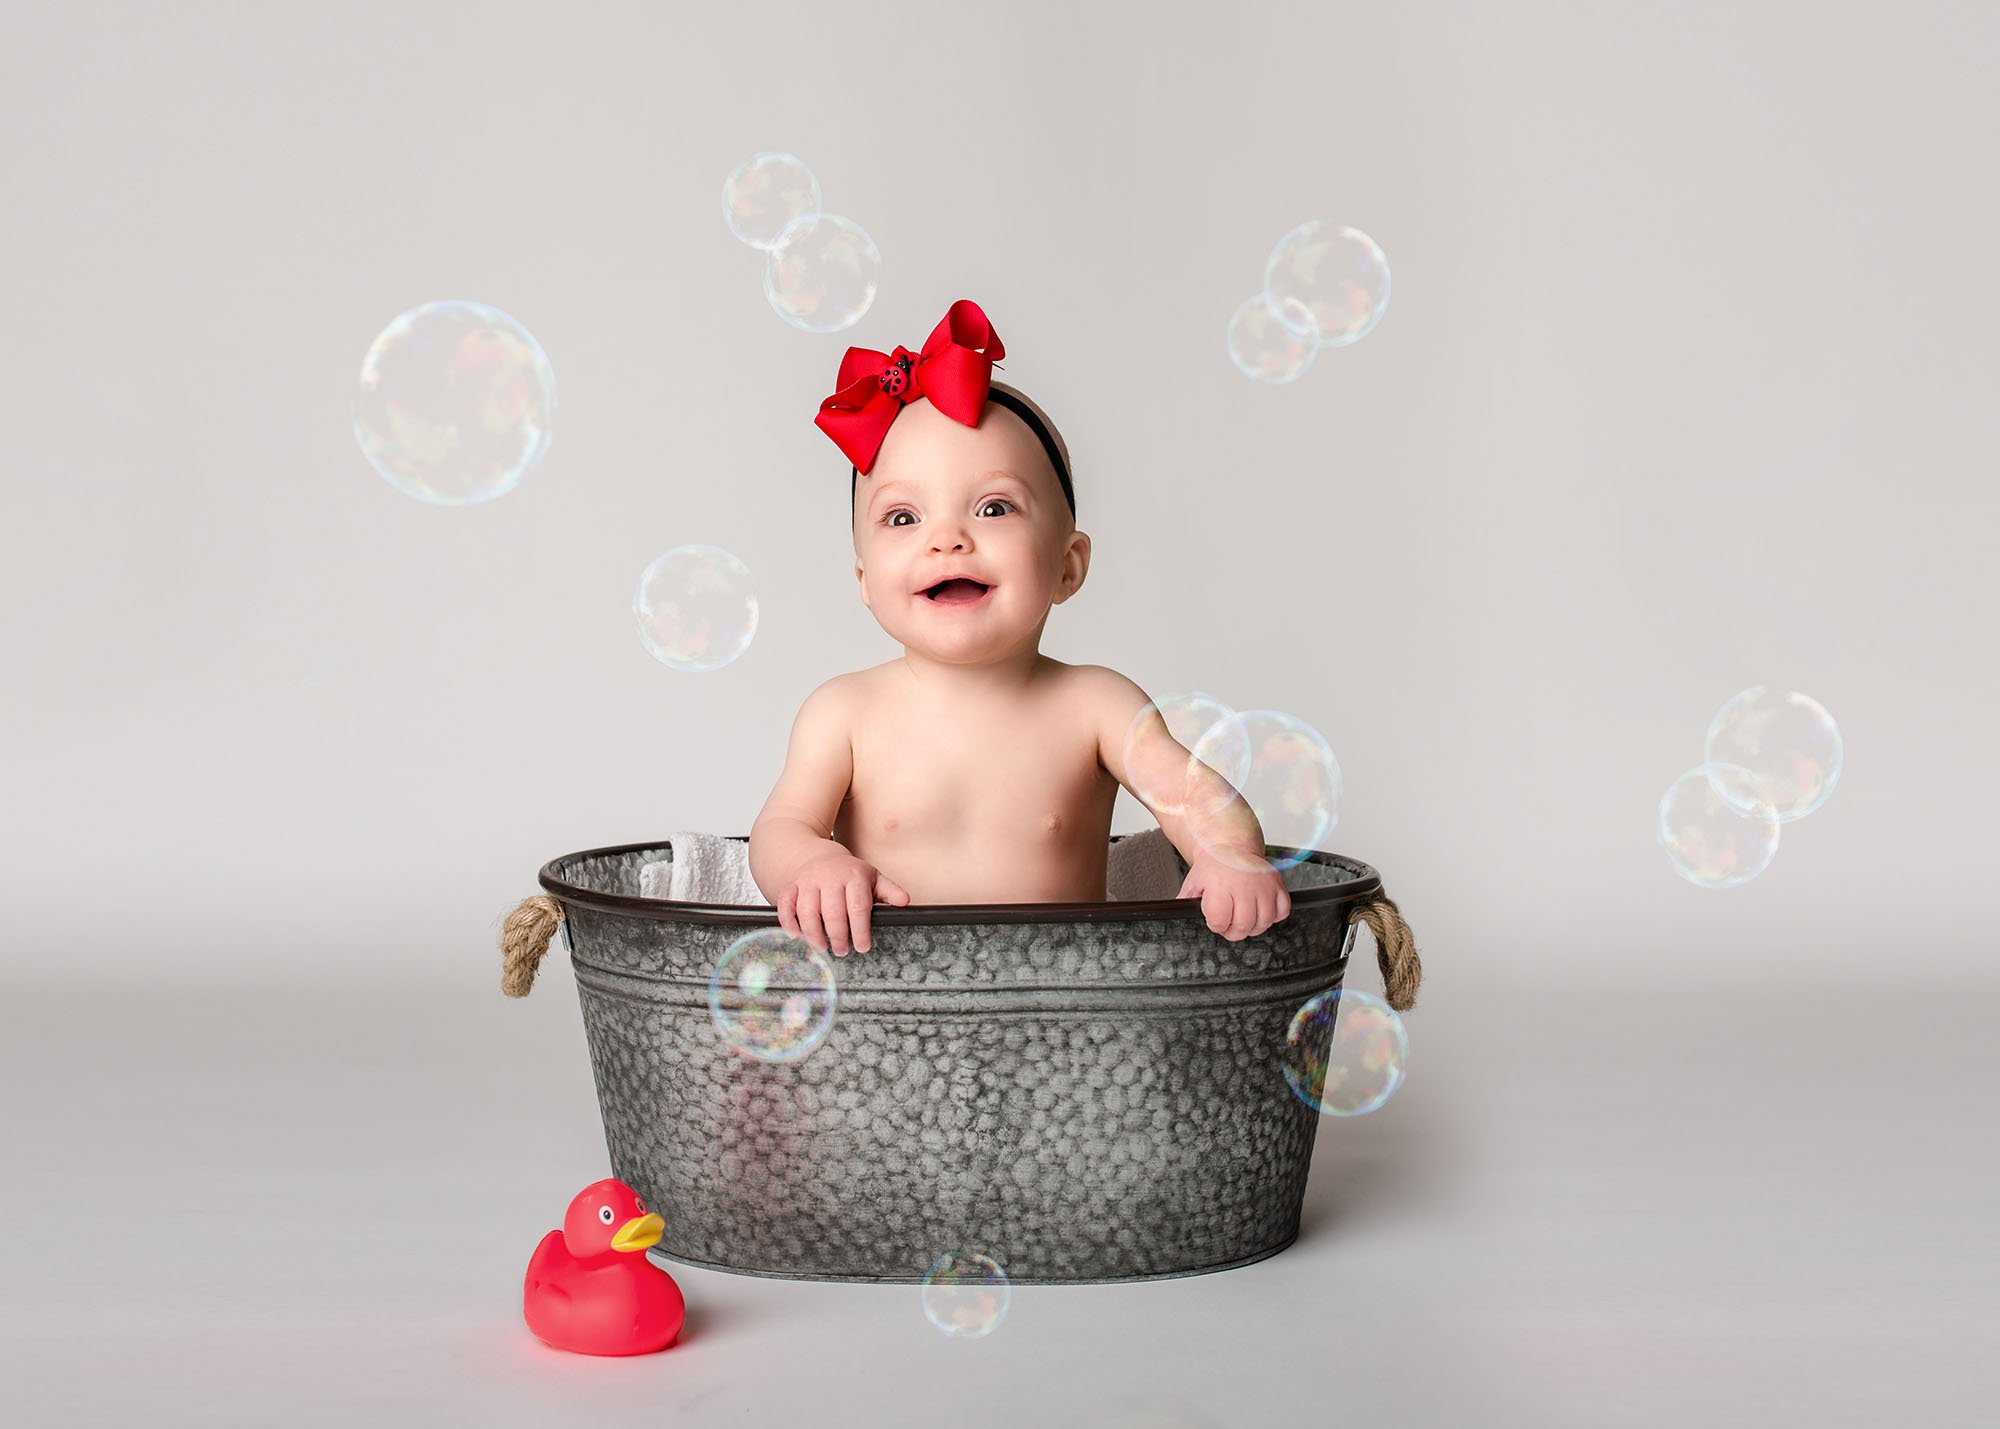 baby girl with red boy taking a bubble bath in a tin tub with a red rubber duck Glastonbury CT Baby Photographer One Big Happy Photo www.onebighappyphoto.com/babies